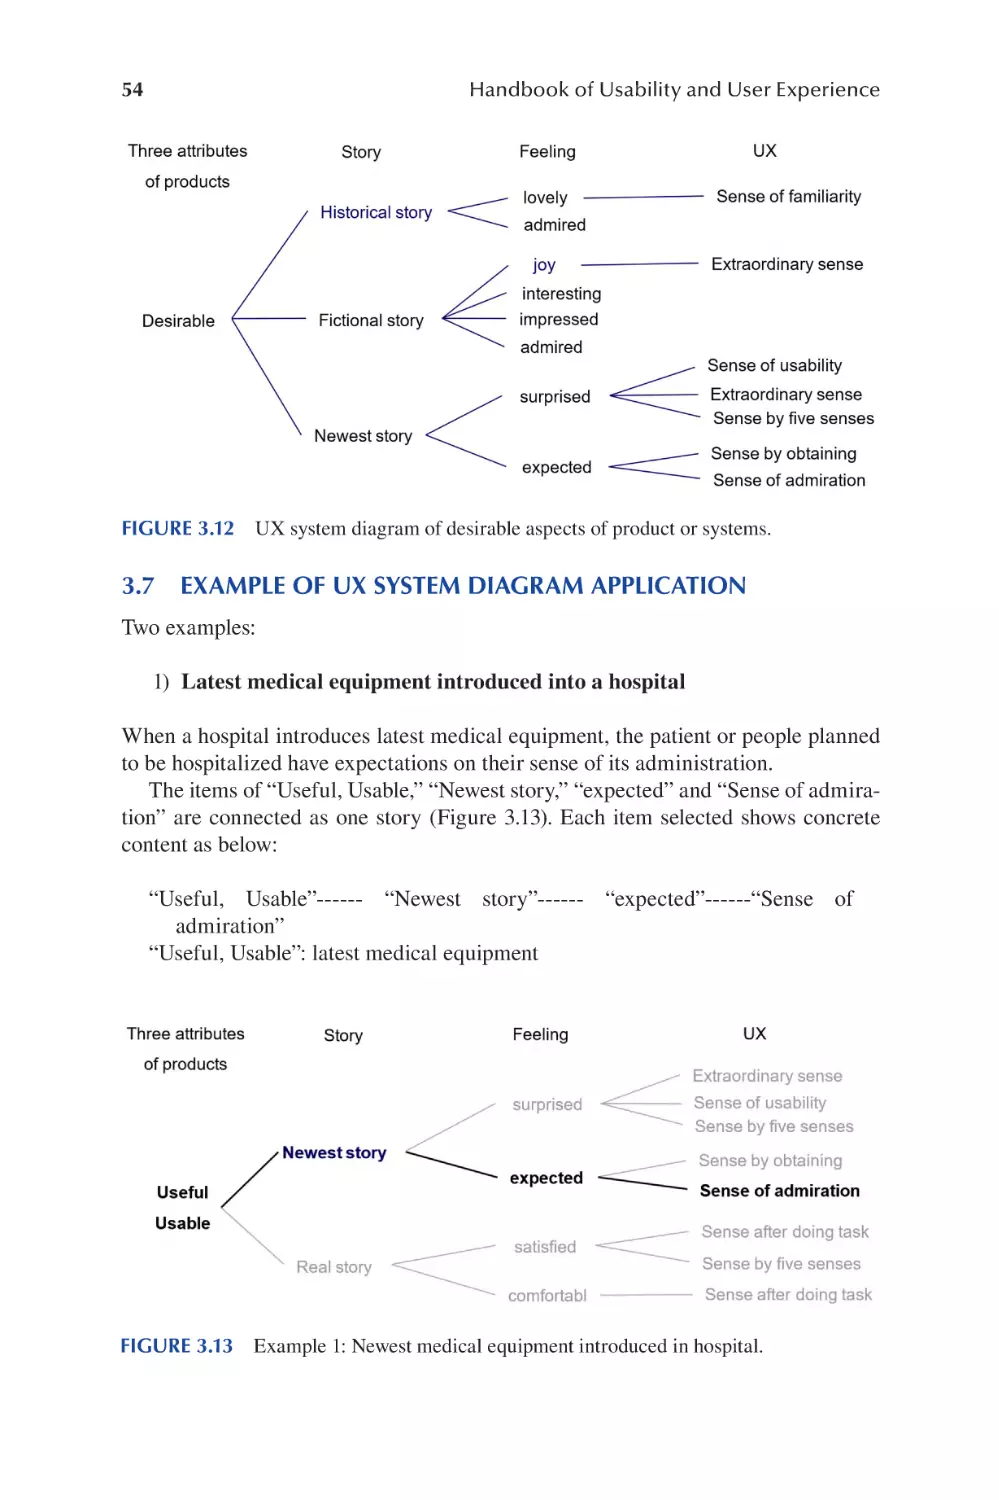 3.7 Example of UX System Diagram Application